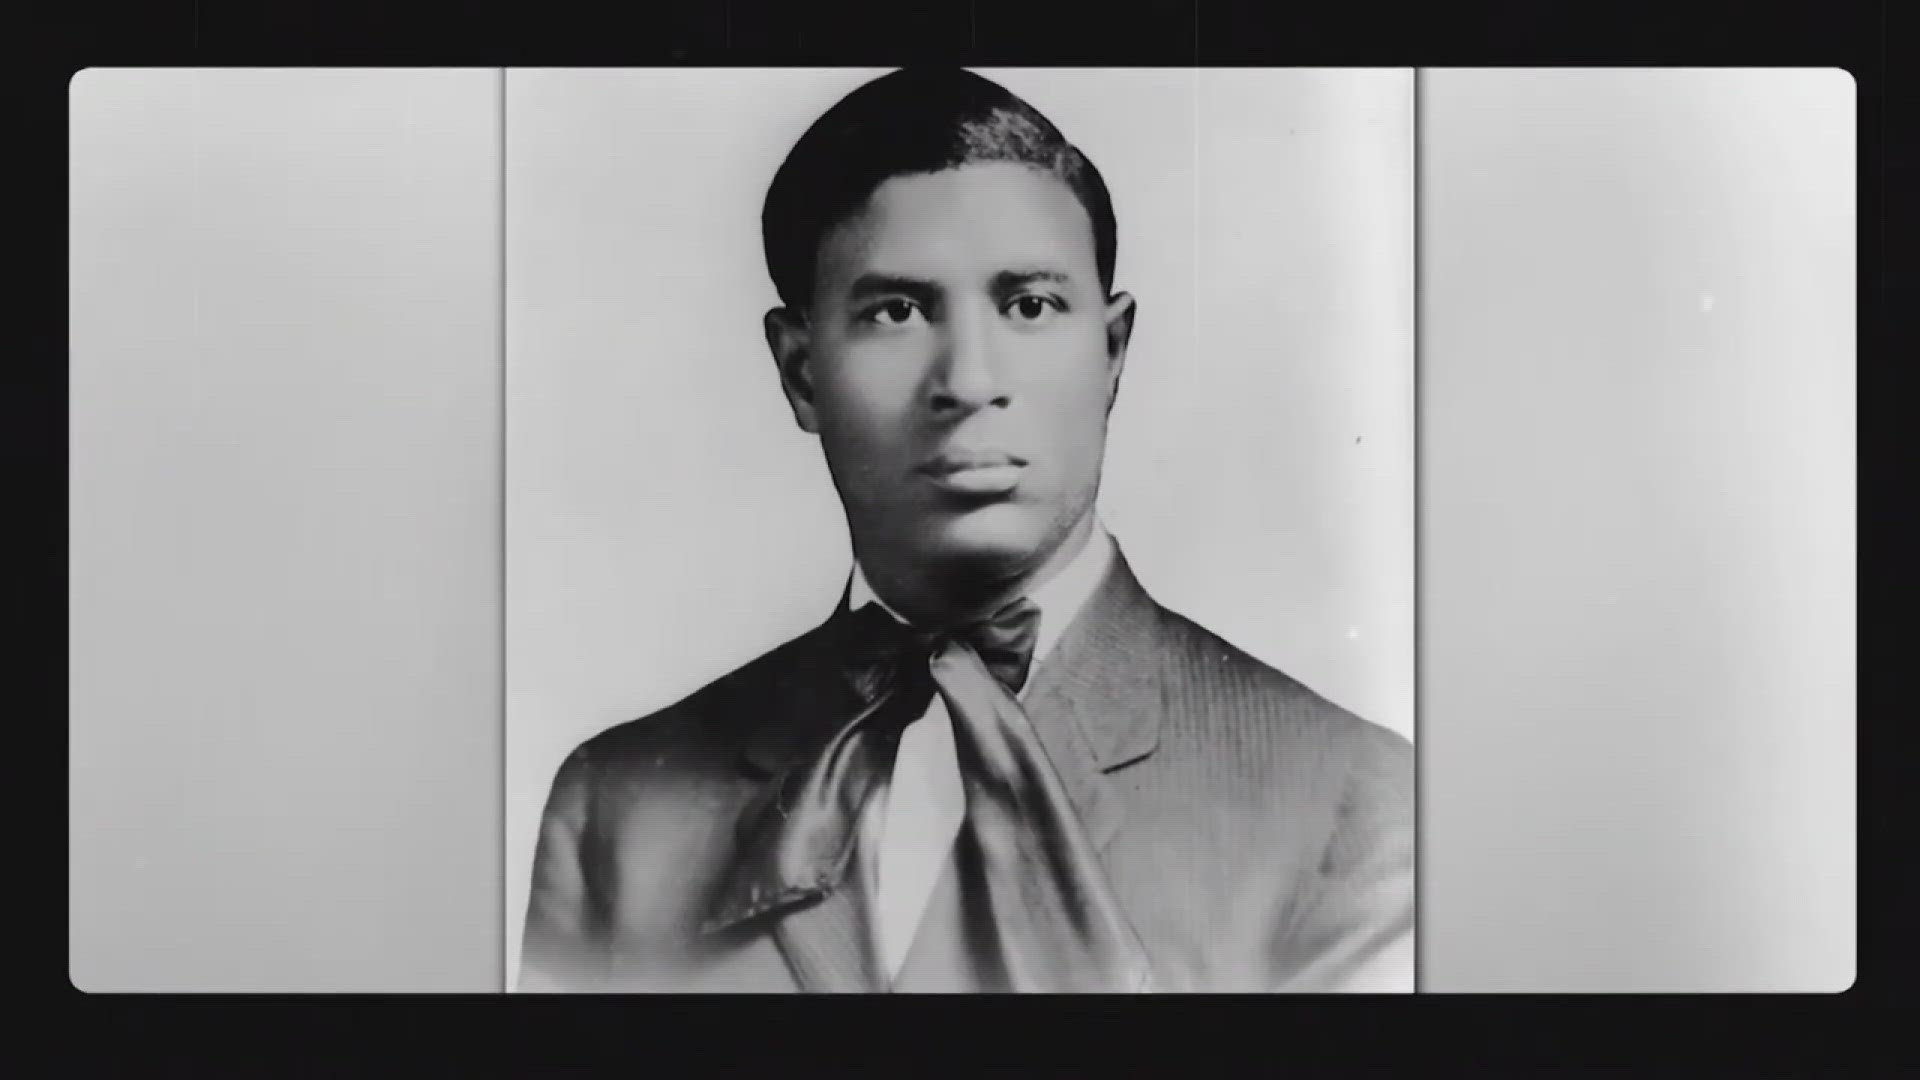 Garrett Morgan's most notable inventions were the stop light and country clubs.